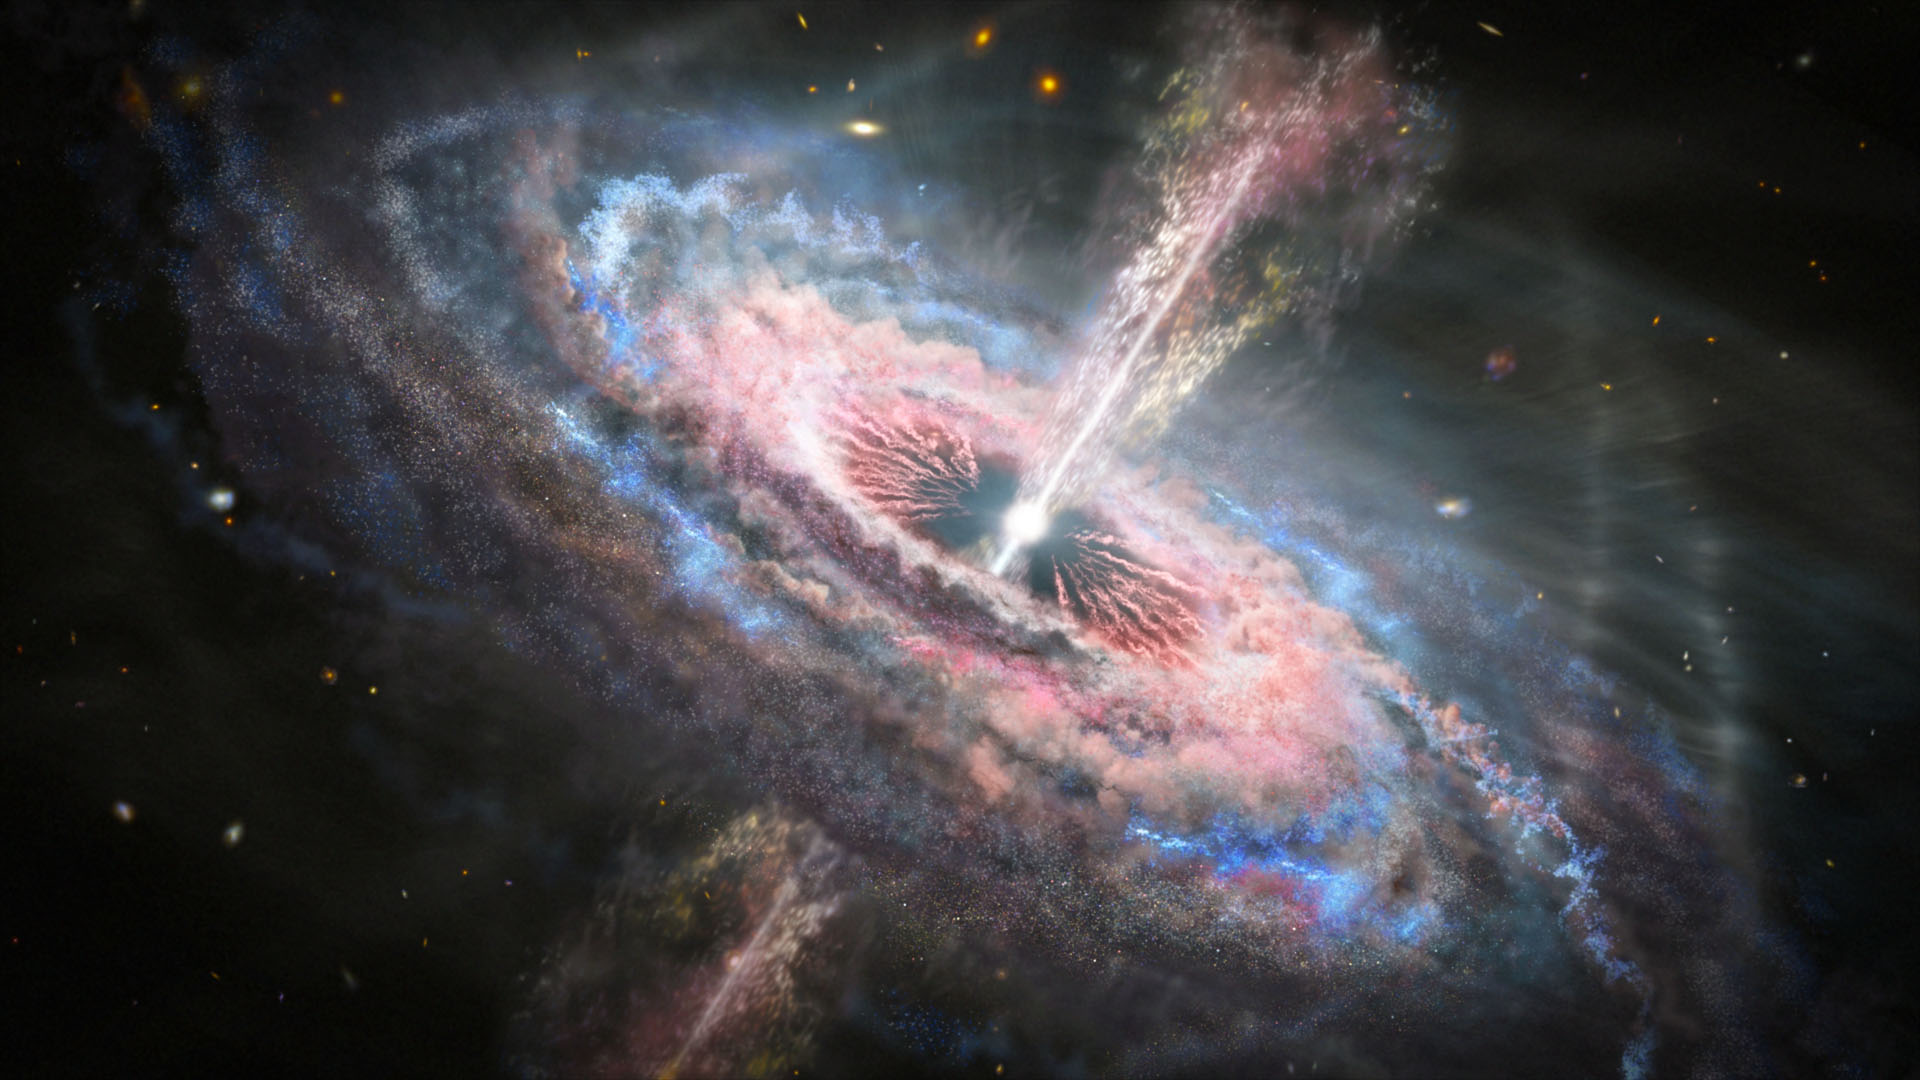 Illustration of a galaxy with a quasar, an active, bright, and distant supermassive black hole, at its heart